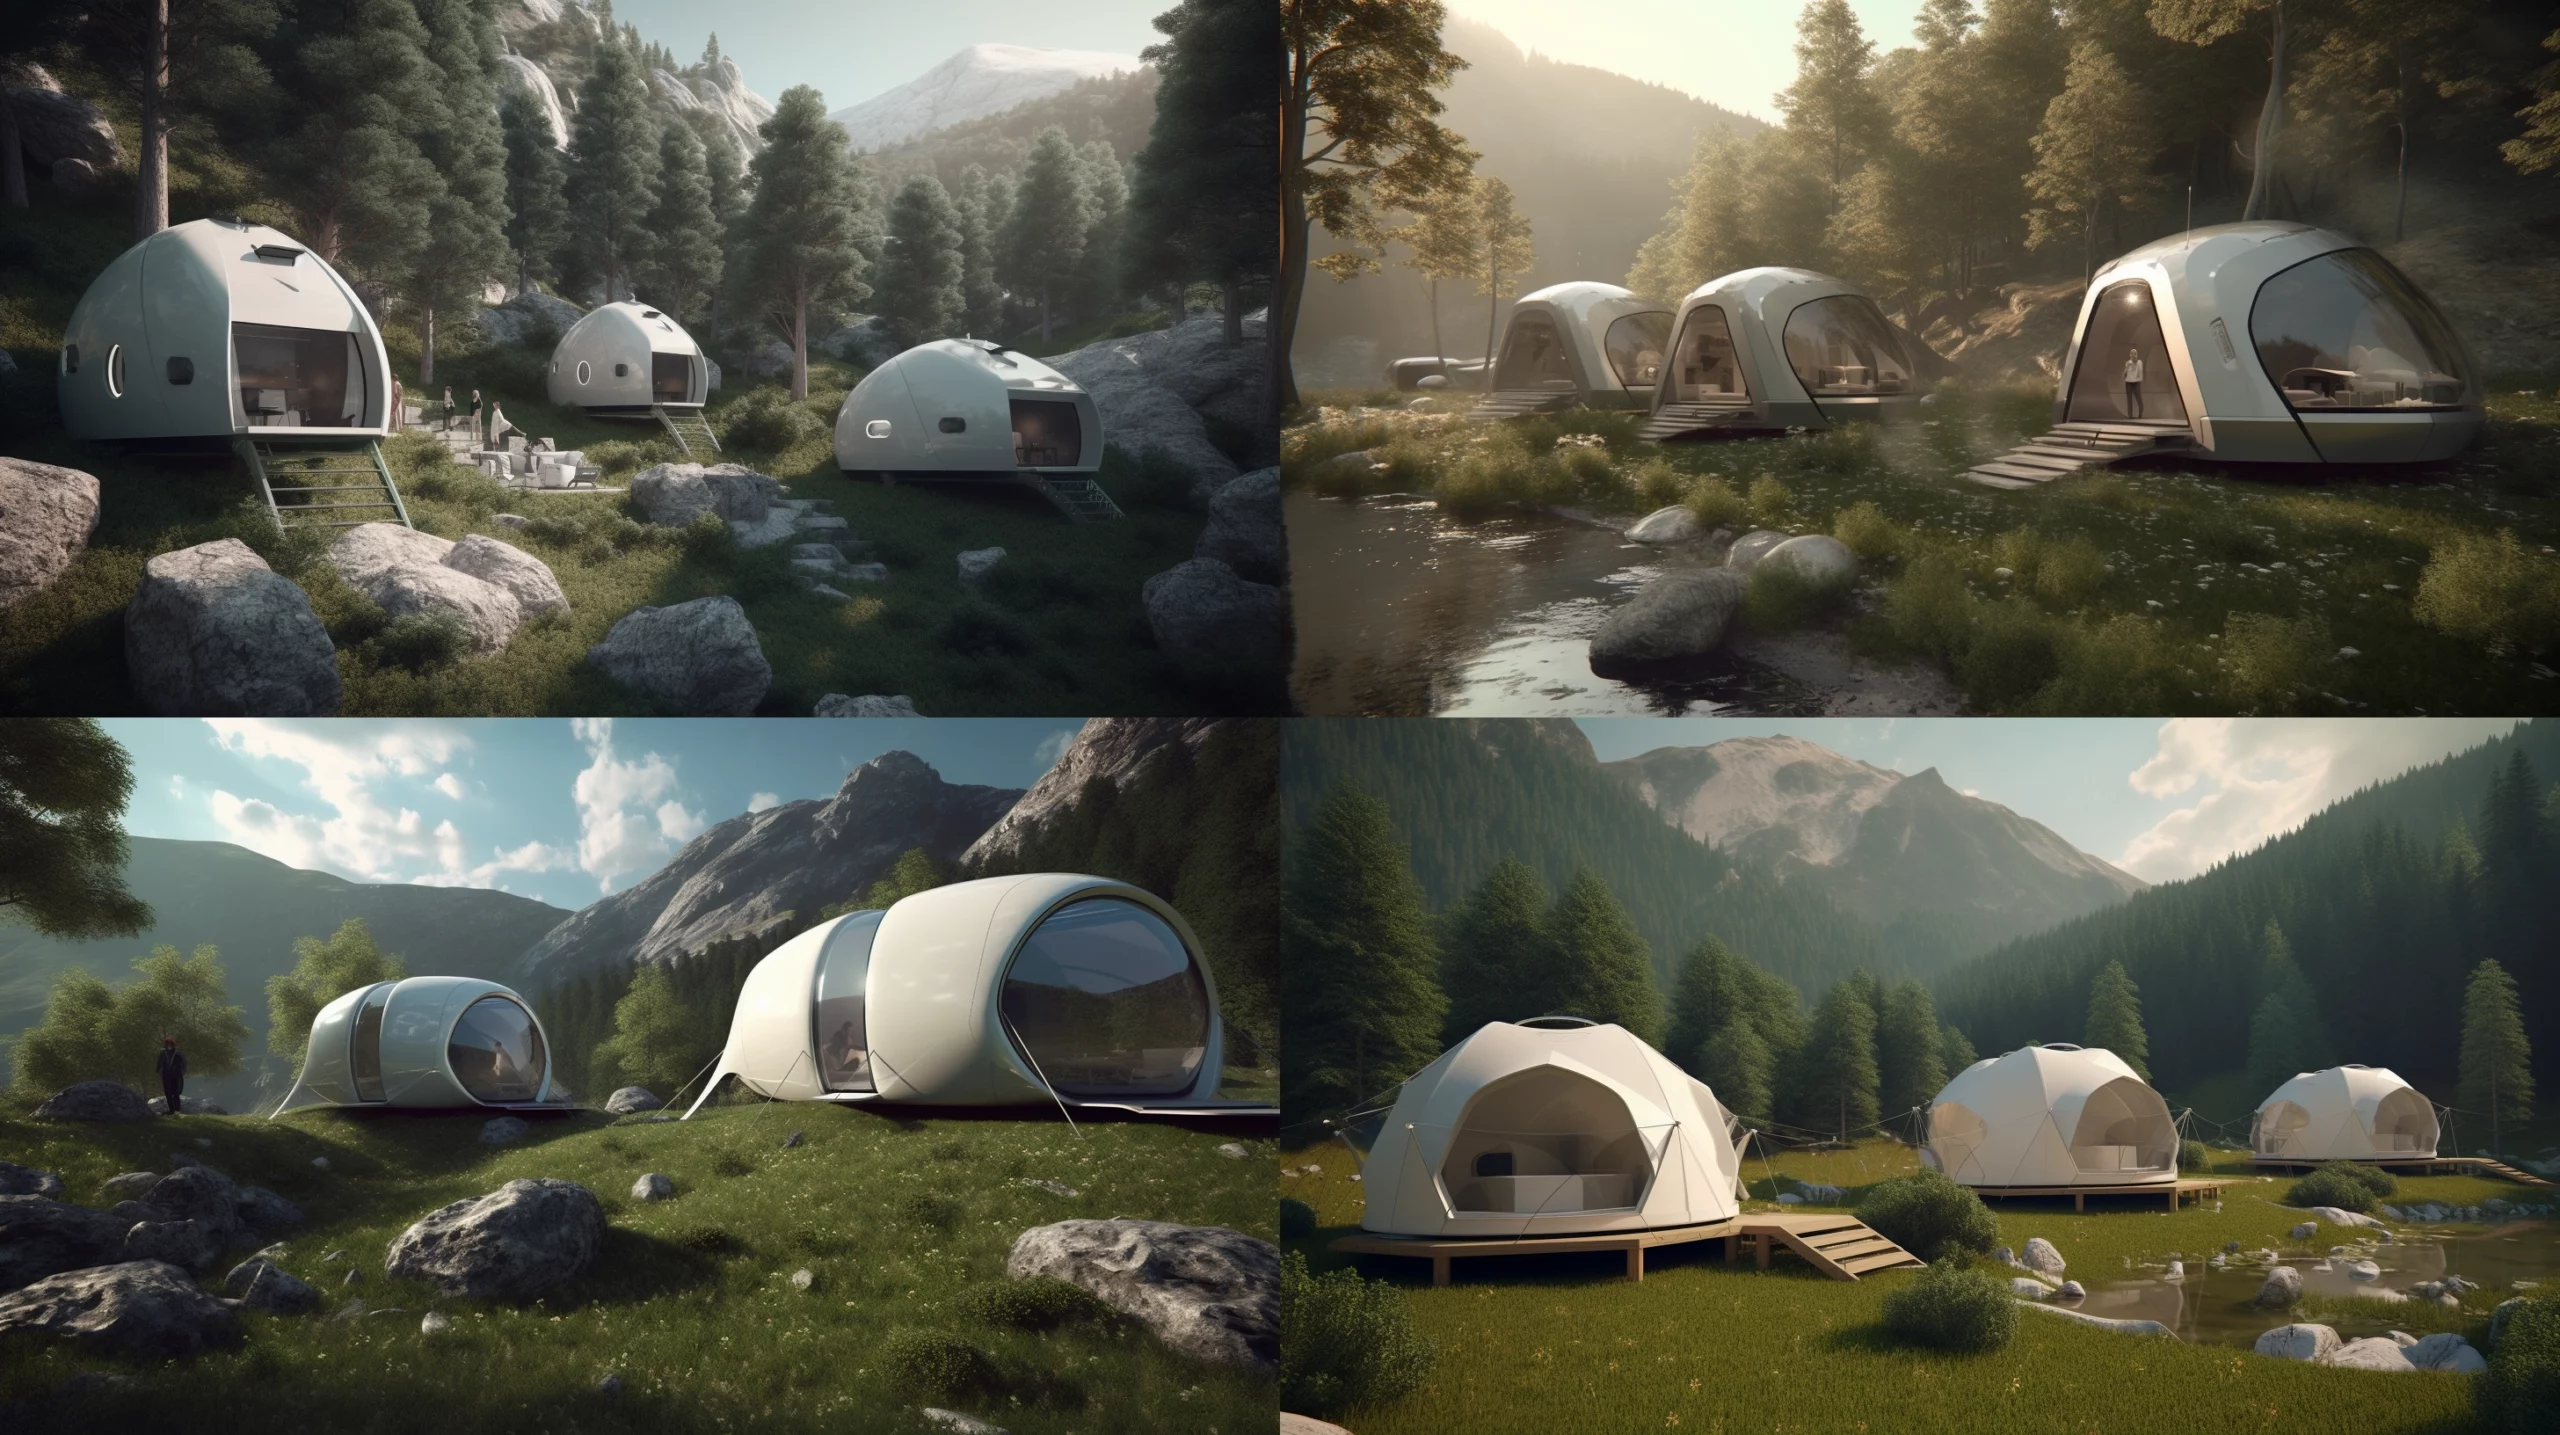 Eco-Futuristic Summer Camping Experience: Revolutionizing the Industry with Sustainable Technology